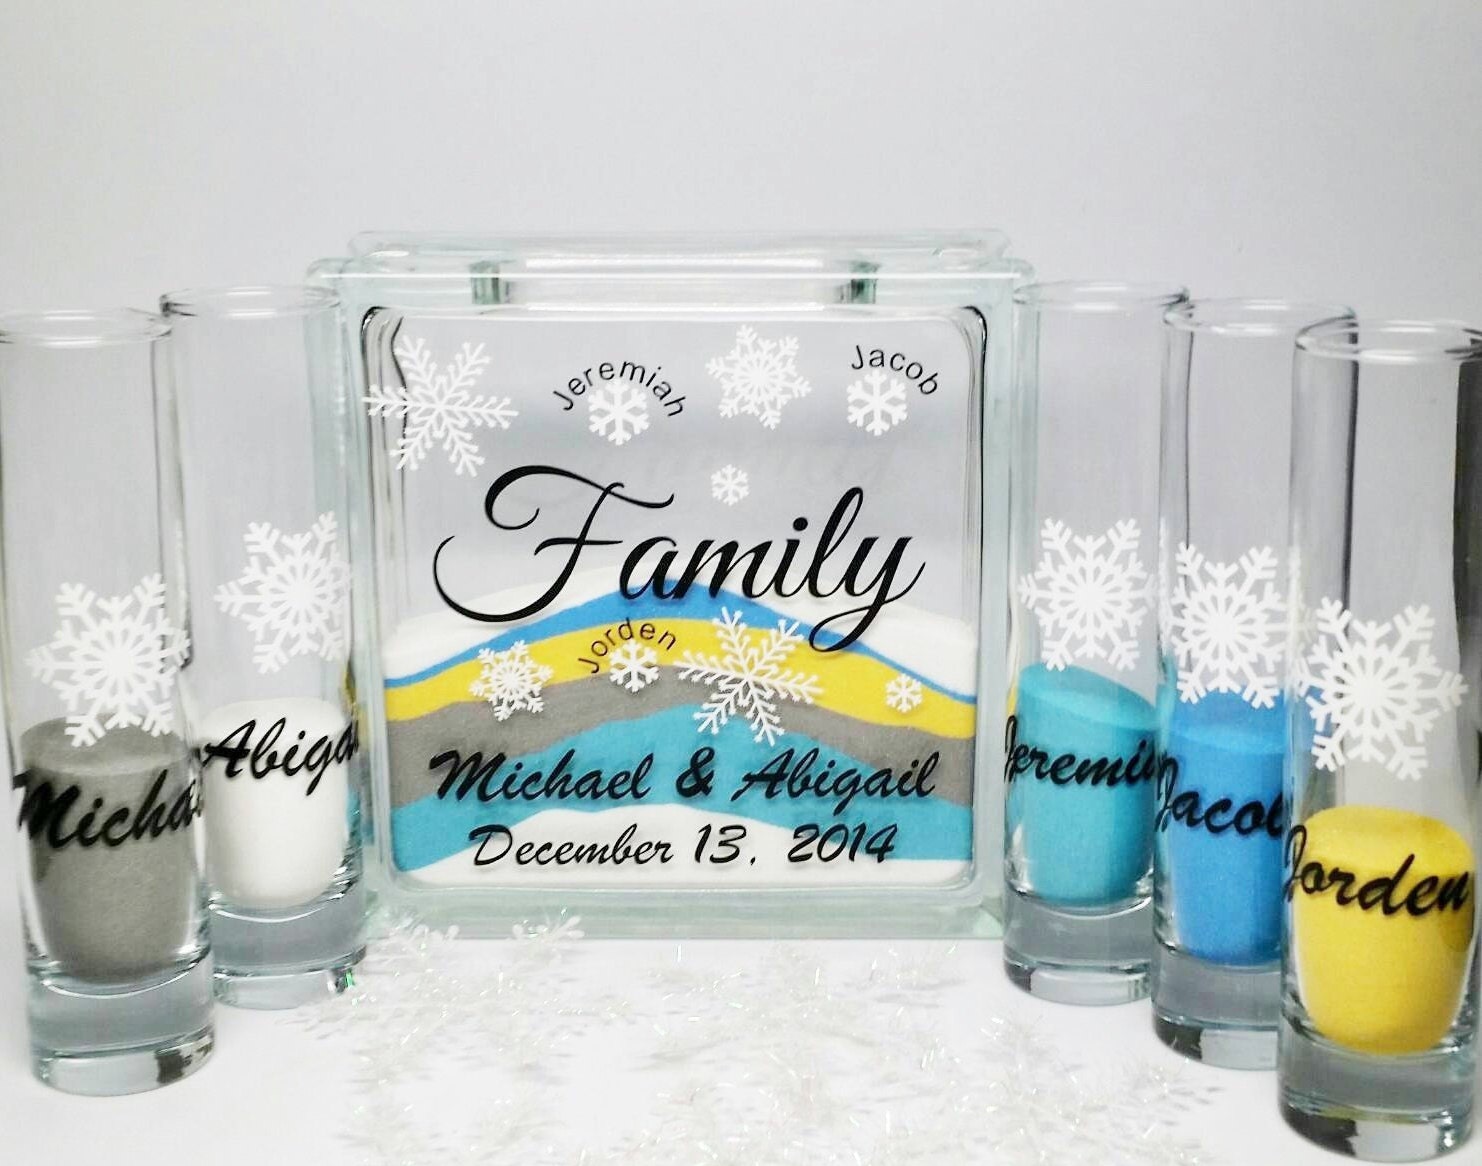 Unity Sand Set For Blended Family, Personalized, Winter Wedding Decor, Candle Alternative, Ceremony Set, Snowflakes Theme